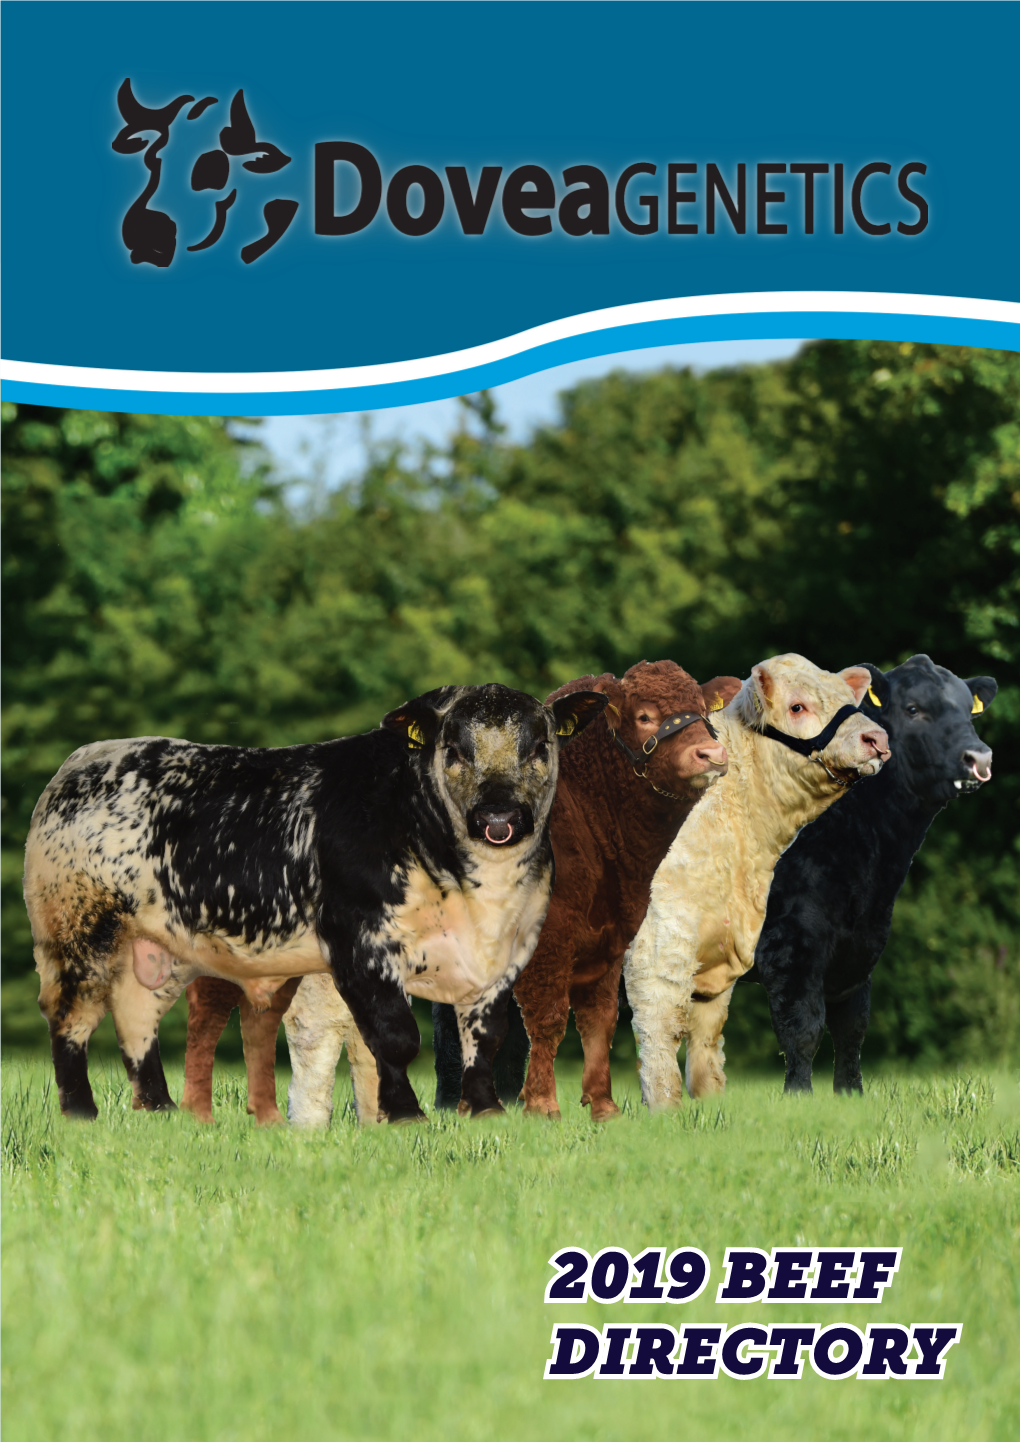 2019 BEEF DIRECTORY INTRODUCTION Welcome to the Dovea Genetics 2019 Beef Directory